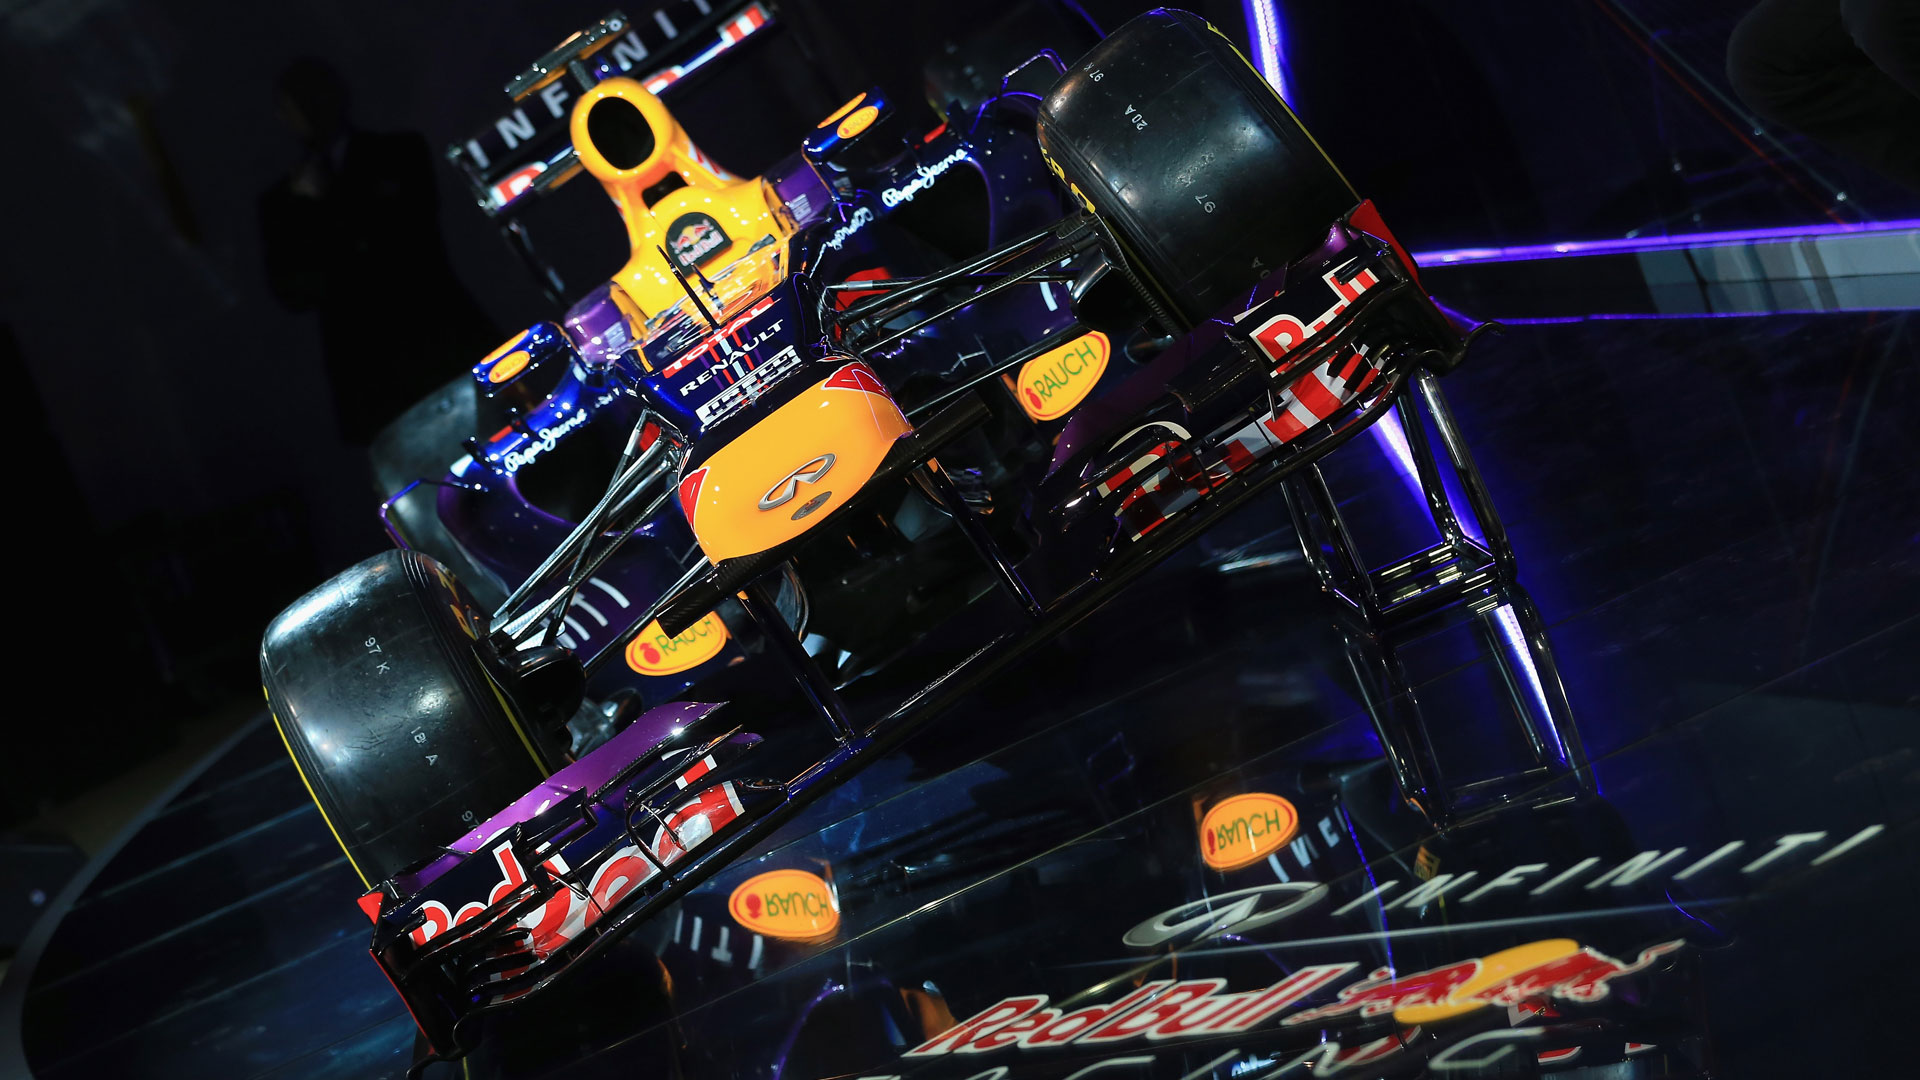 Red Bull F1 Wallpaper HD Racing Rb9 Front